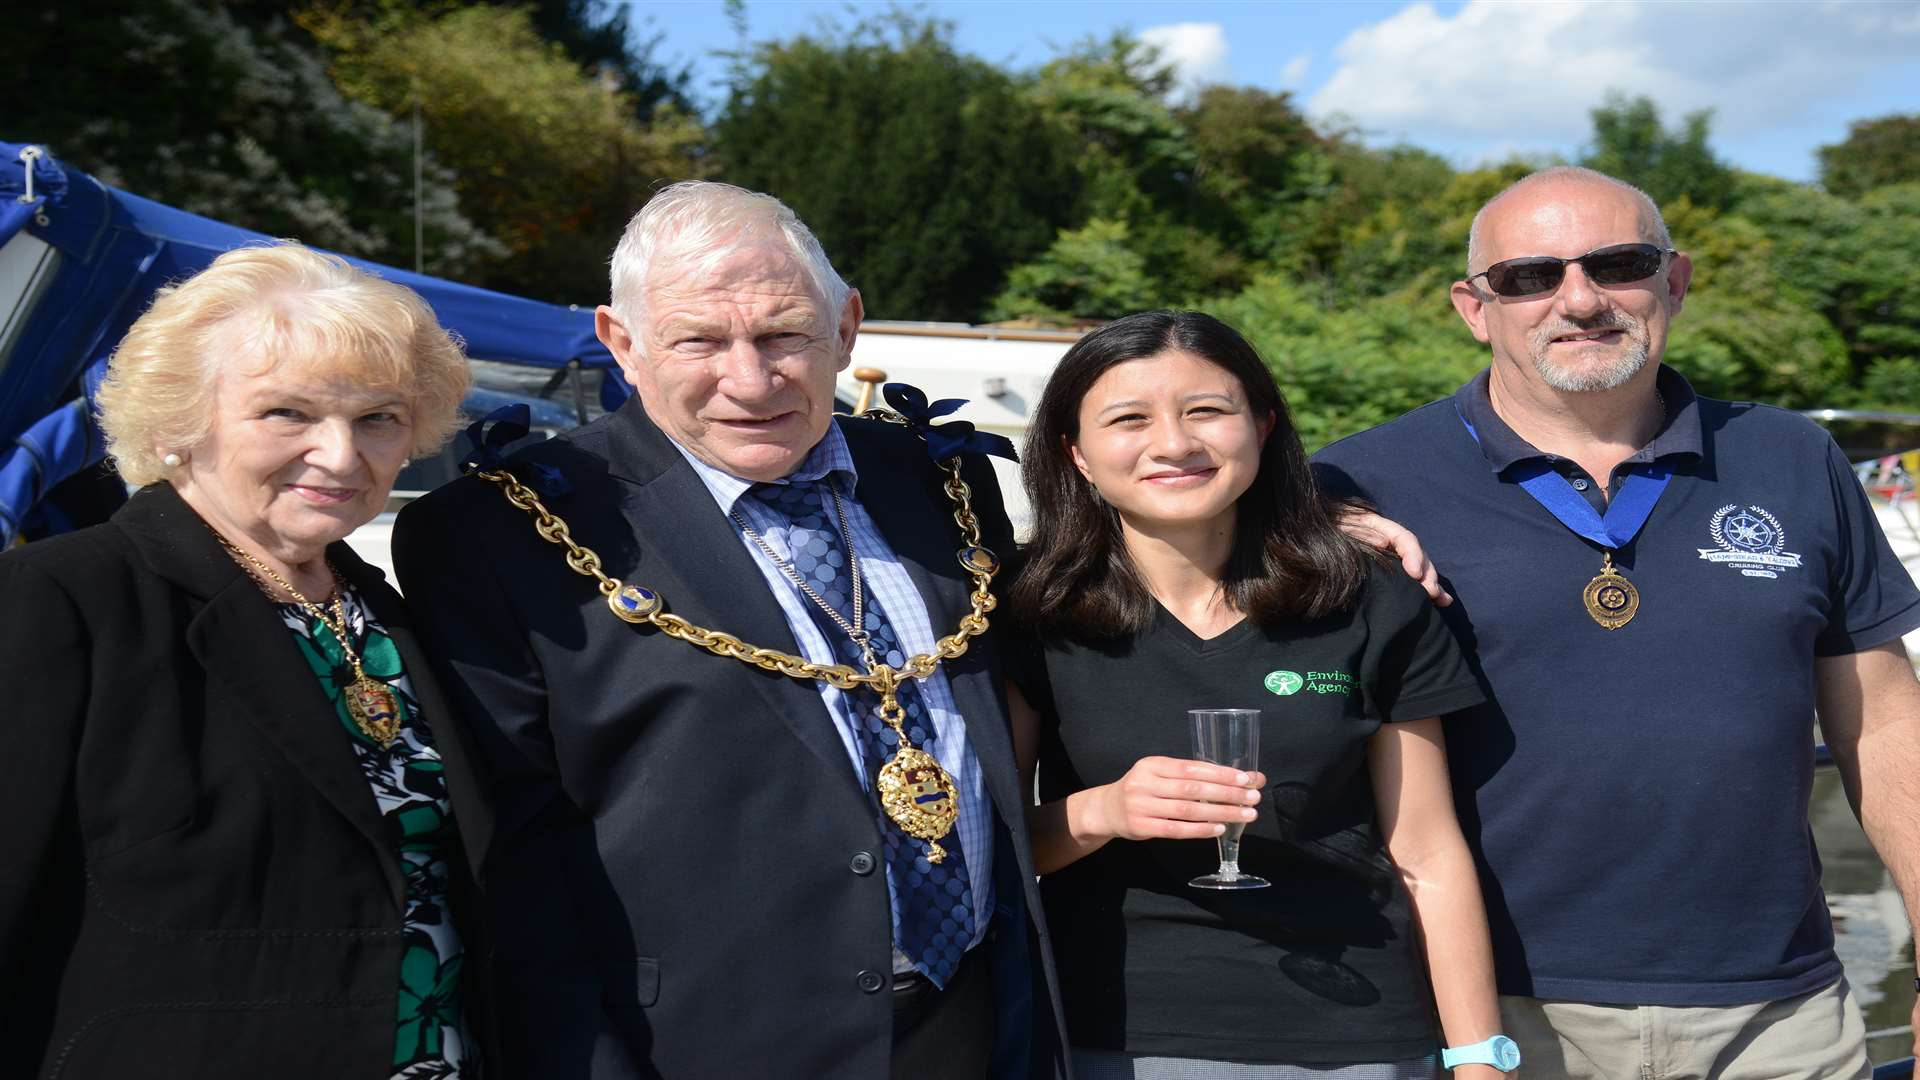 Brenda Greer, mayoress, Cllr Malcolm Greer, the Mayor of Maidstone with Julie Foley from the Environment Agency and Mark Smurthwaite